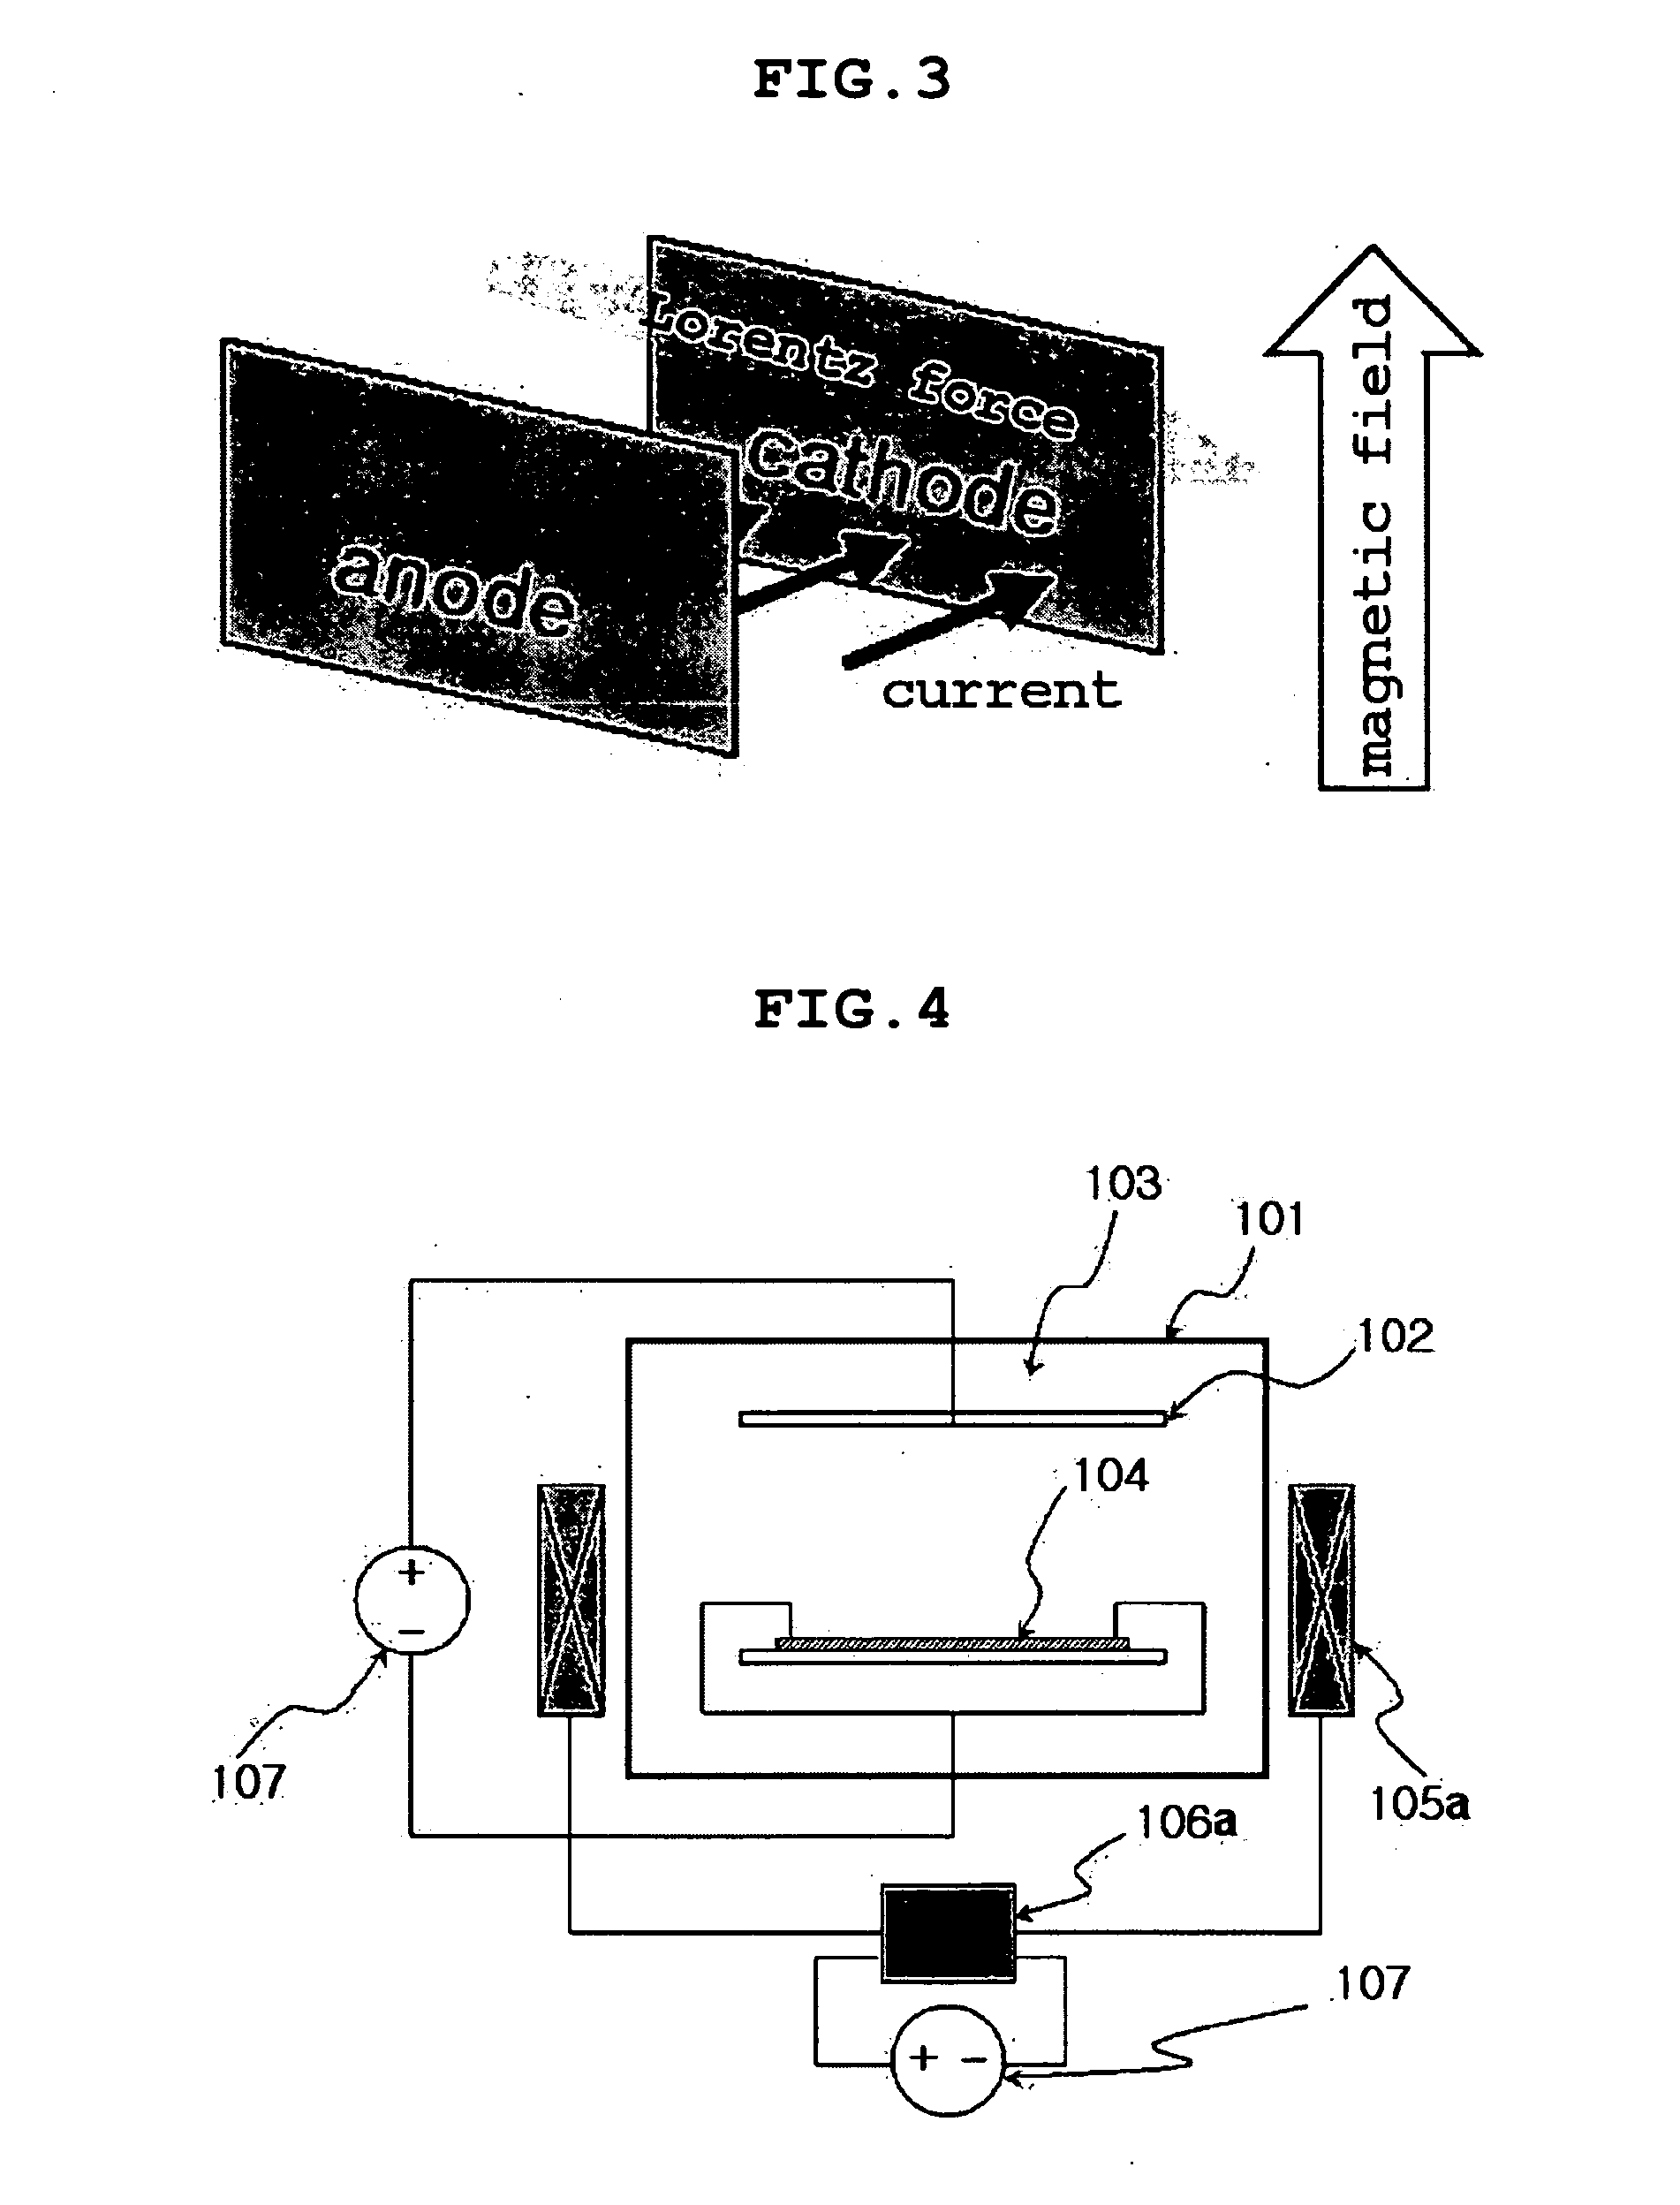 Method of electroplating printed circuit board using magnetic field having periodic directionality